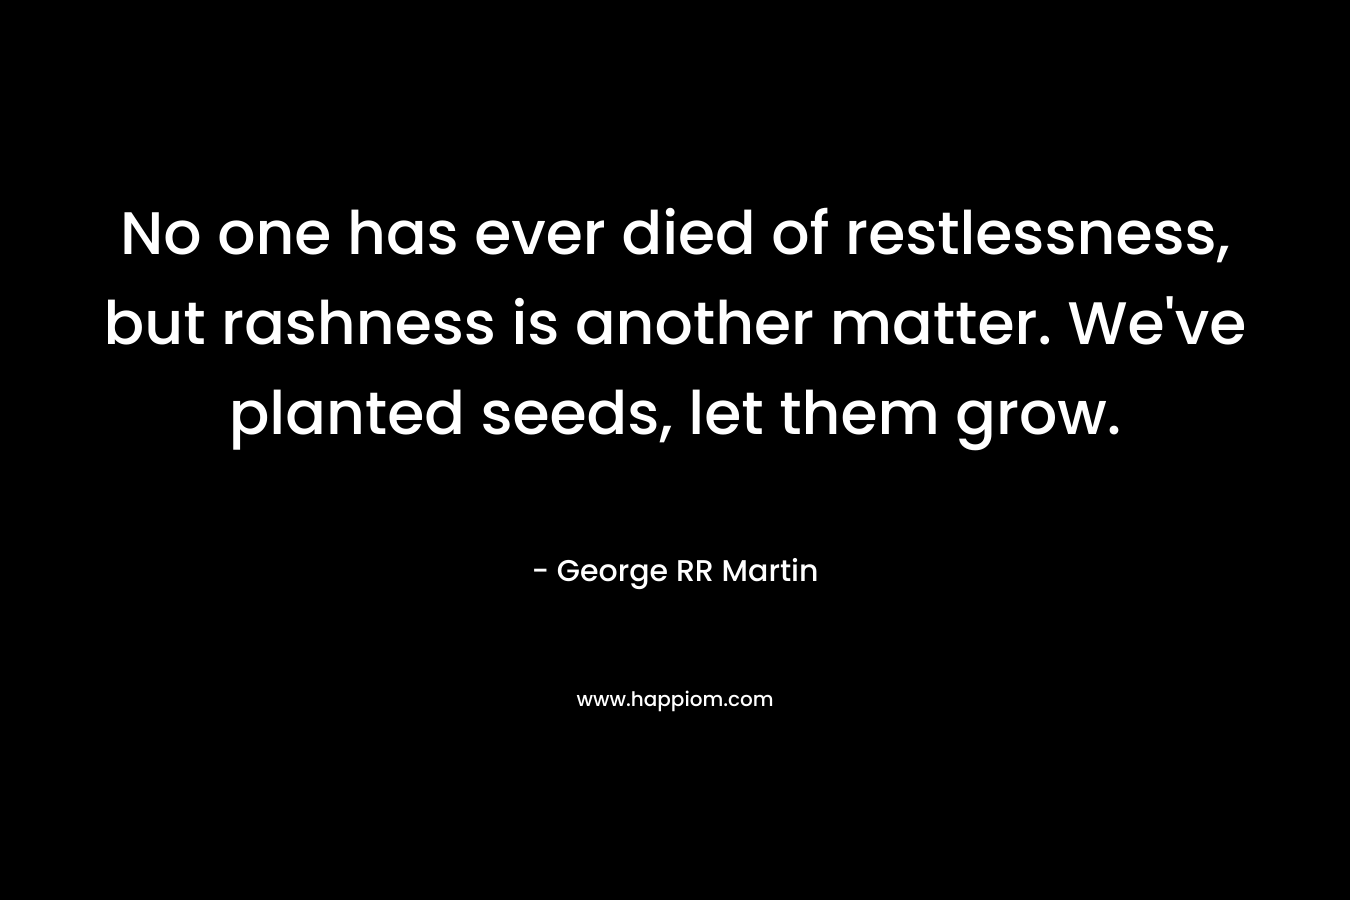 No one has ever died of restlessness, but rashness is another matter. We've planted seeds, let them grow.